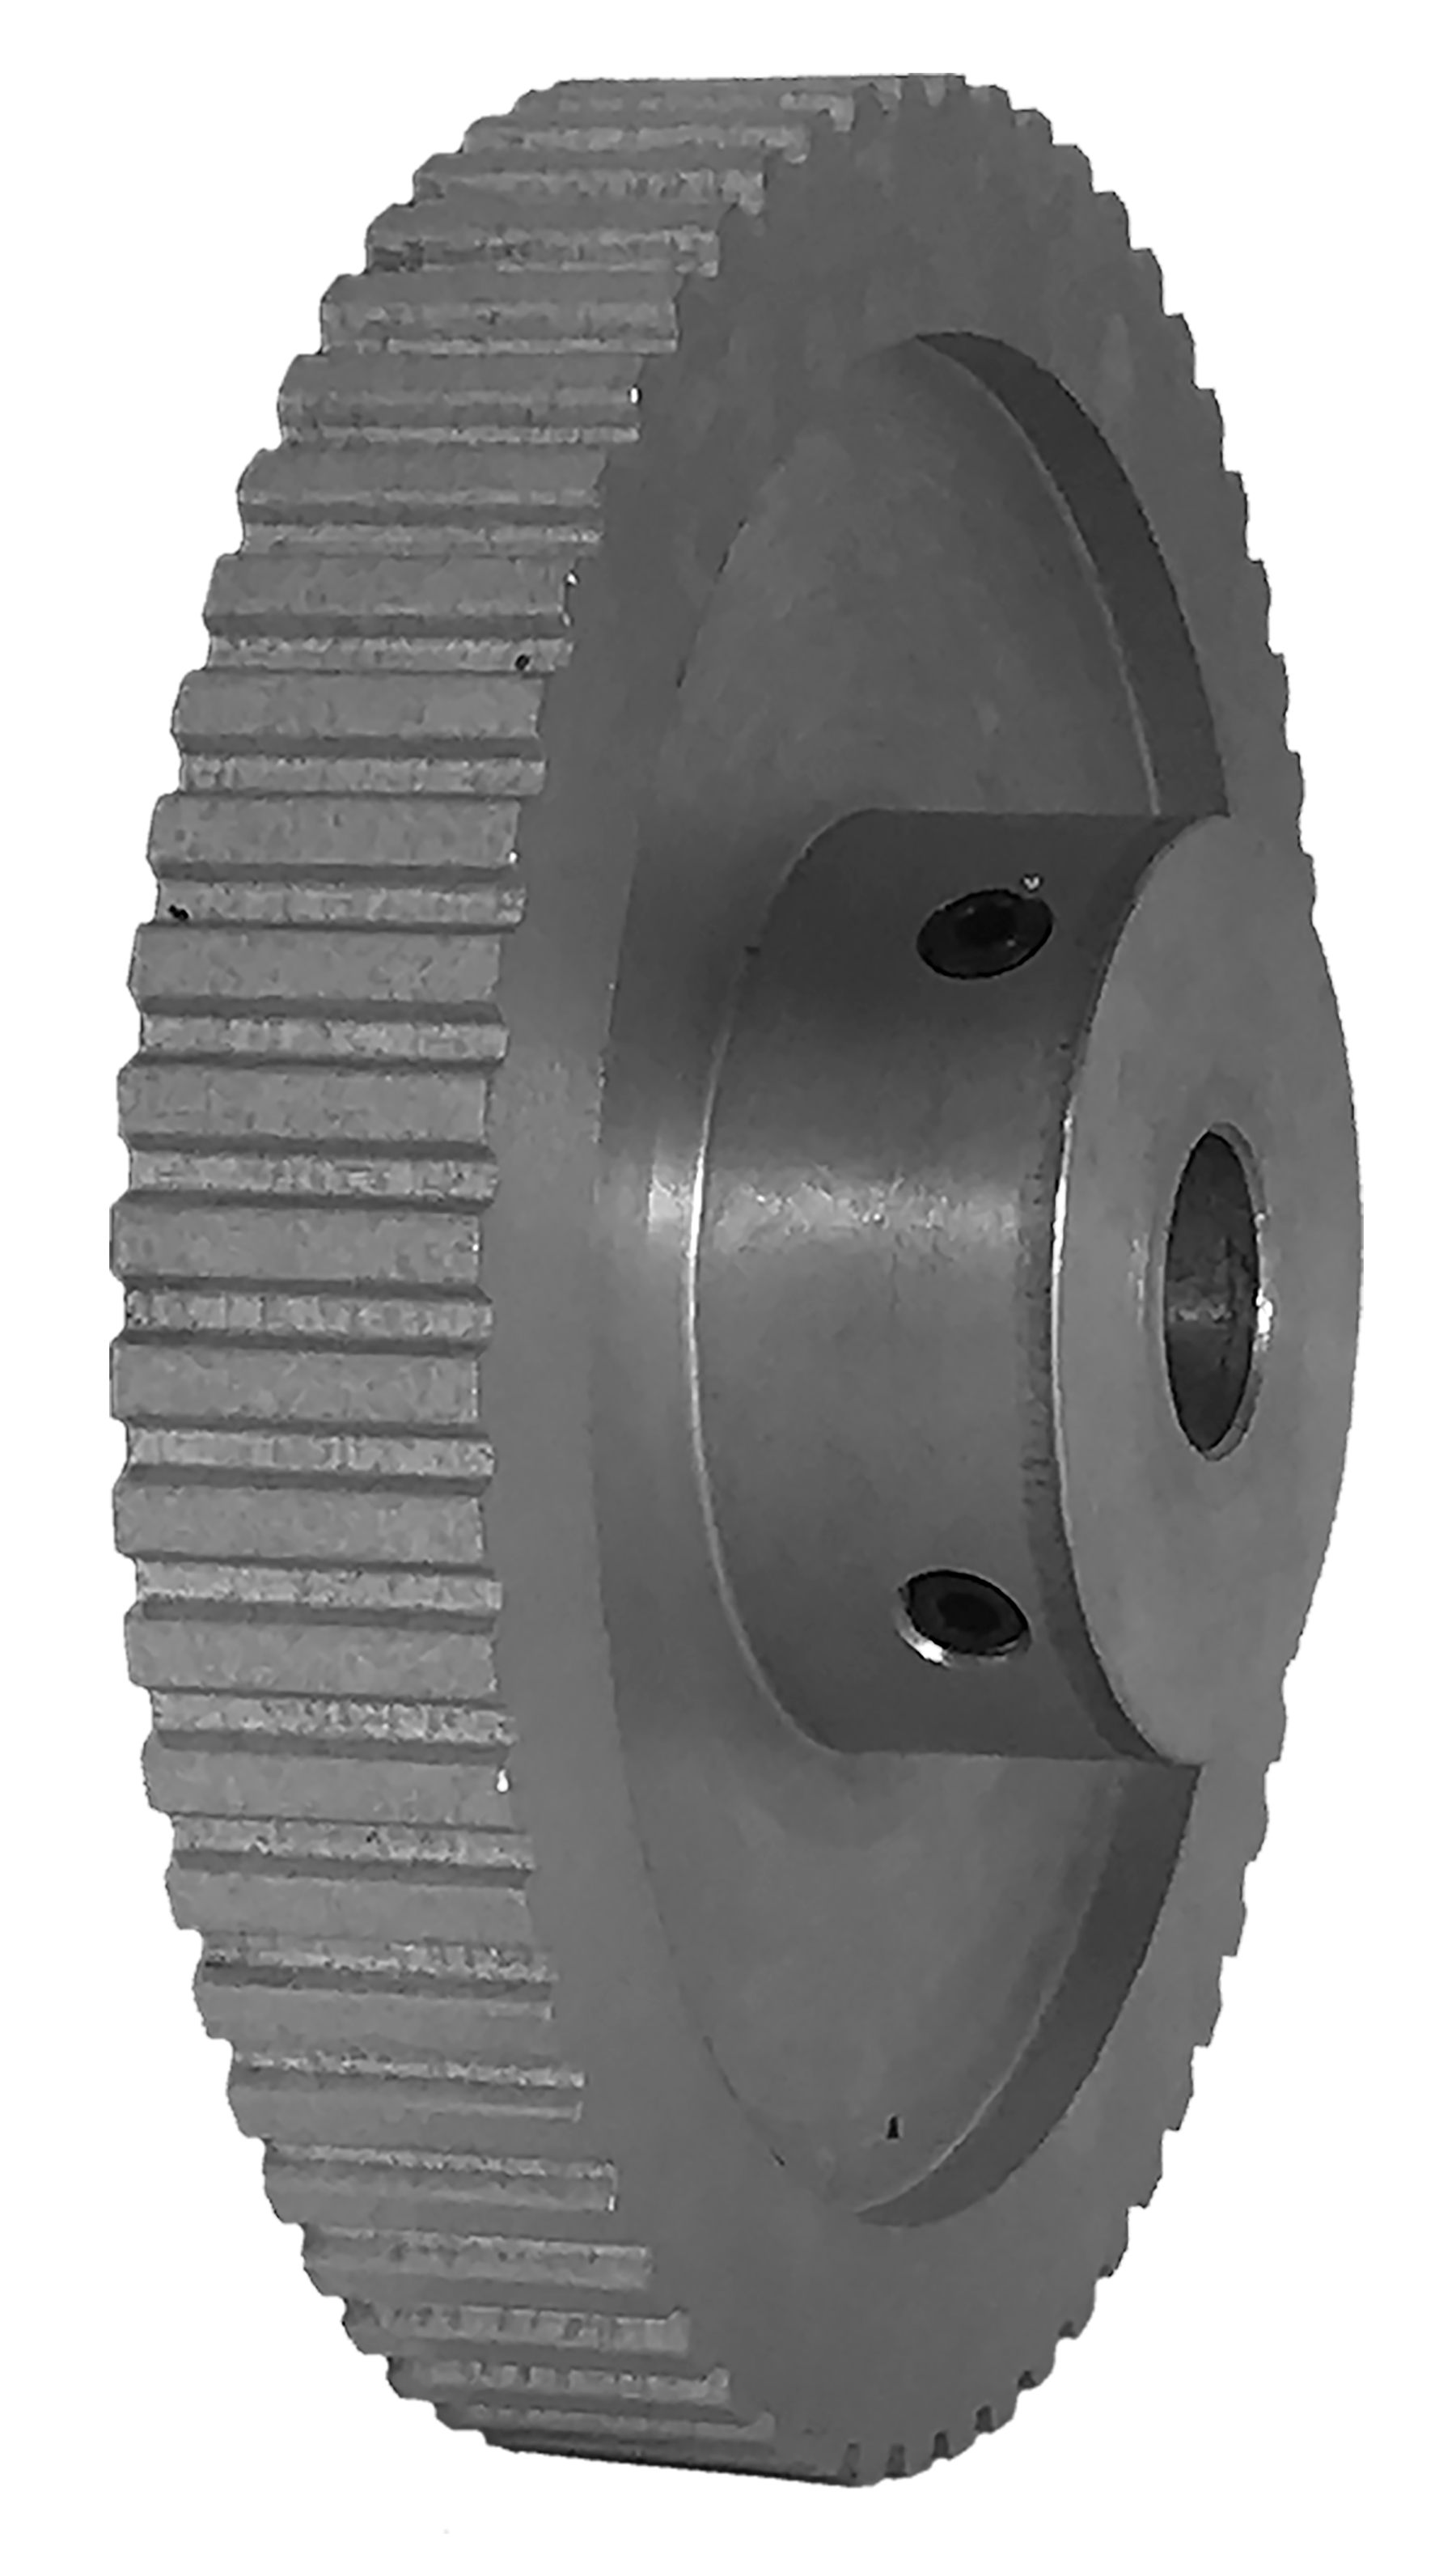 60XL037-6WA6 - Aluminum Imperial Pitch Pulleys